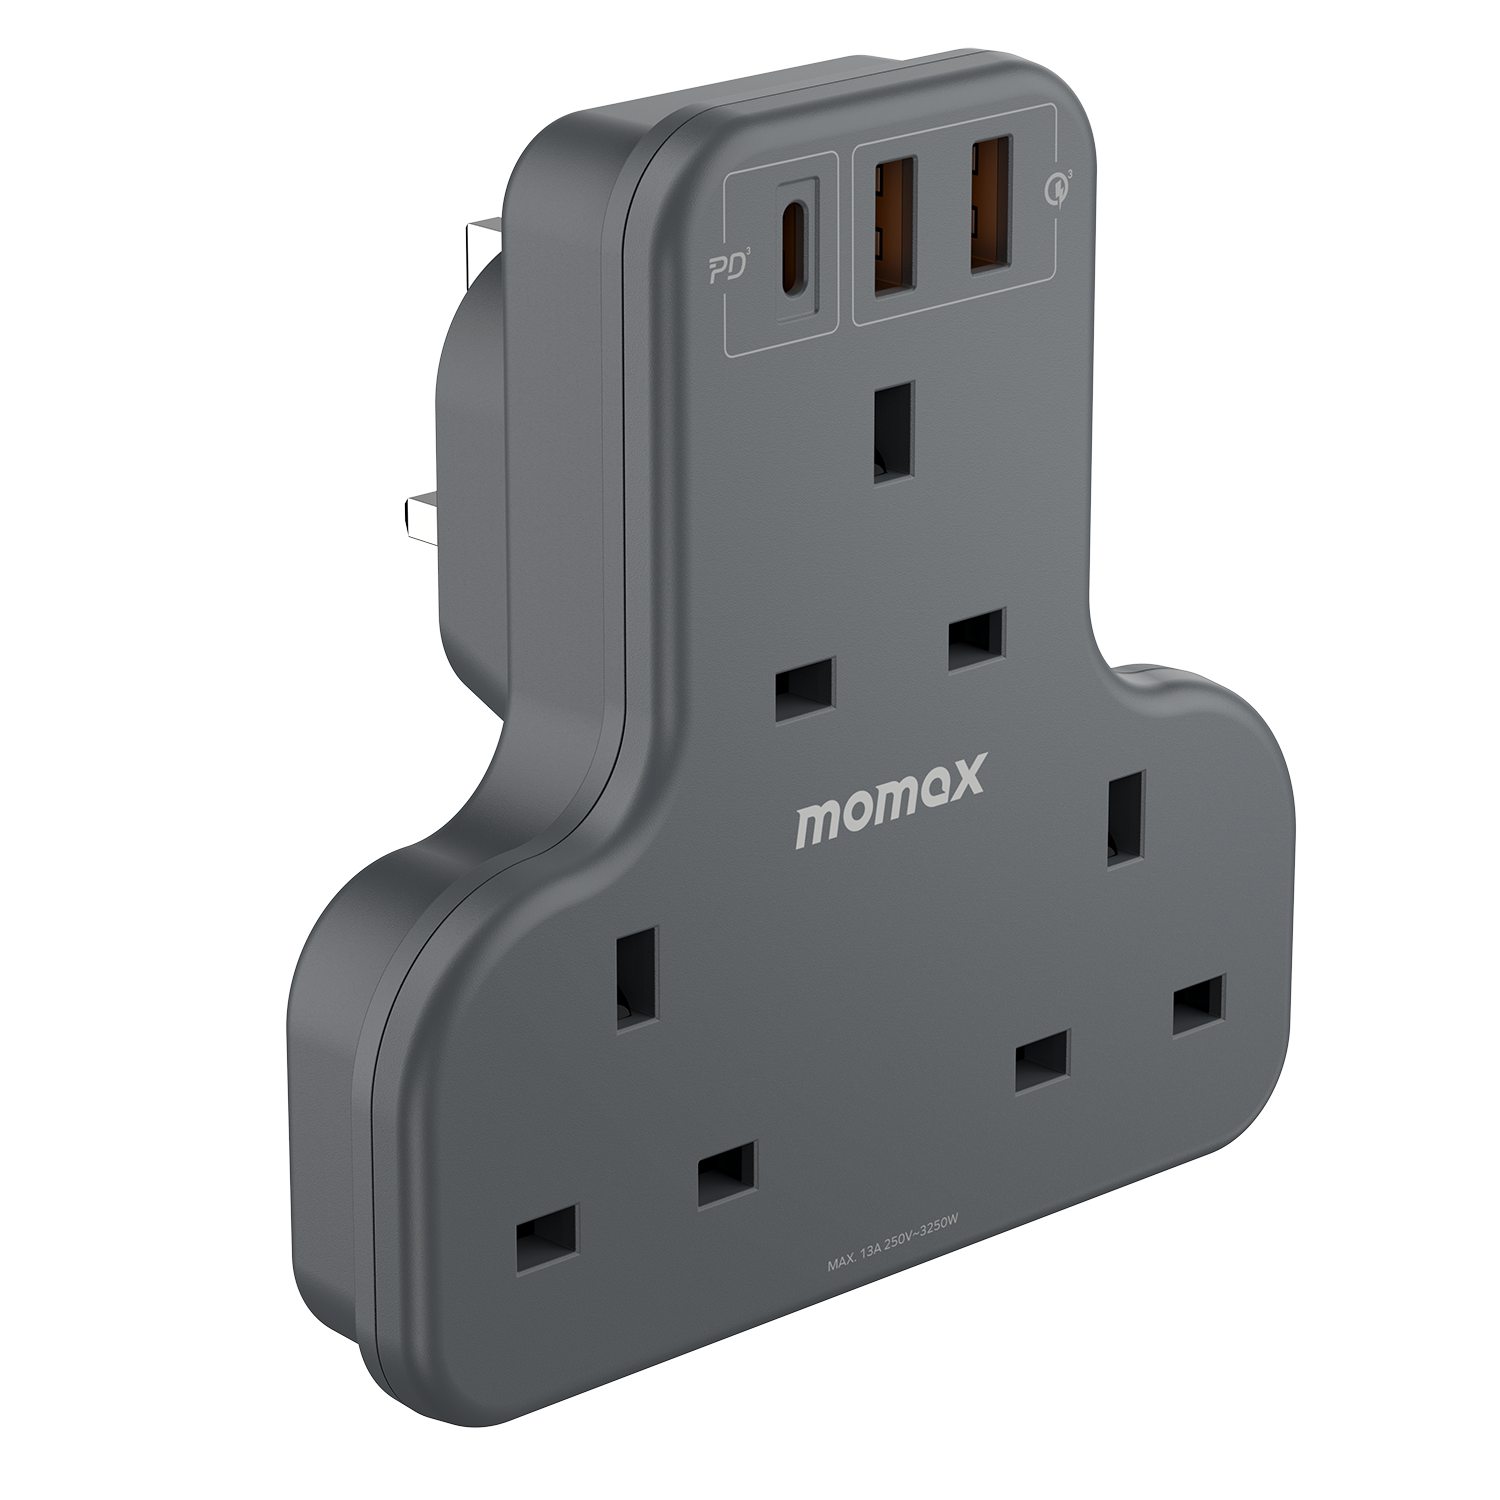 Oneplug | 3-Outlet T-Shaped Extension Socket With USB